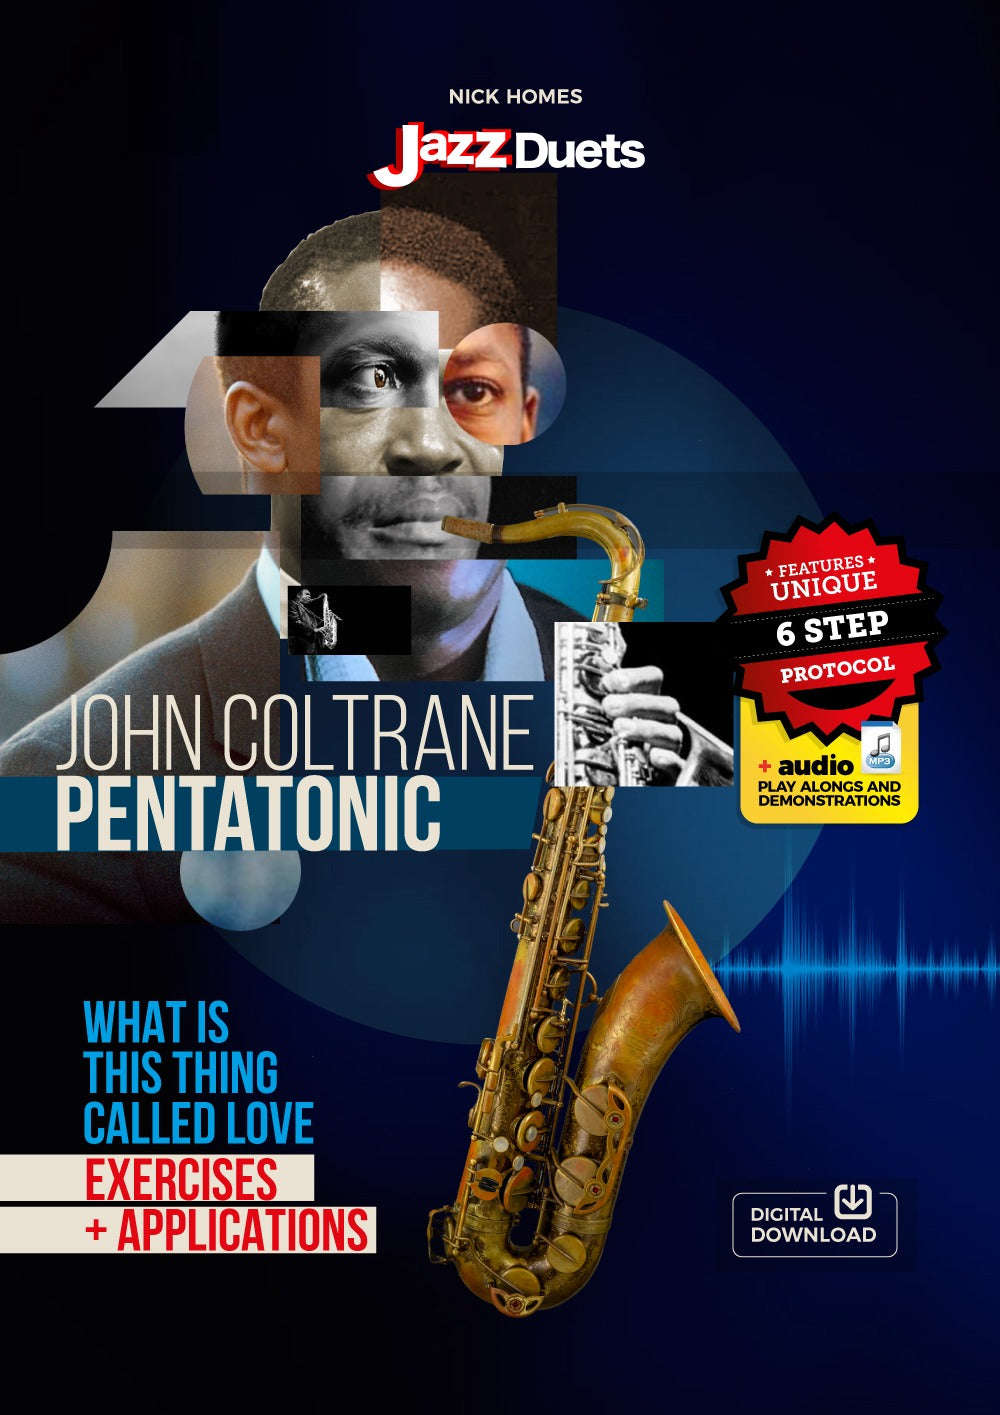 Coltrane Pentatonic &quot;What is this thing called love&quot; exercises